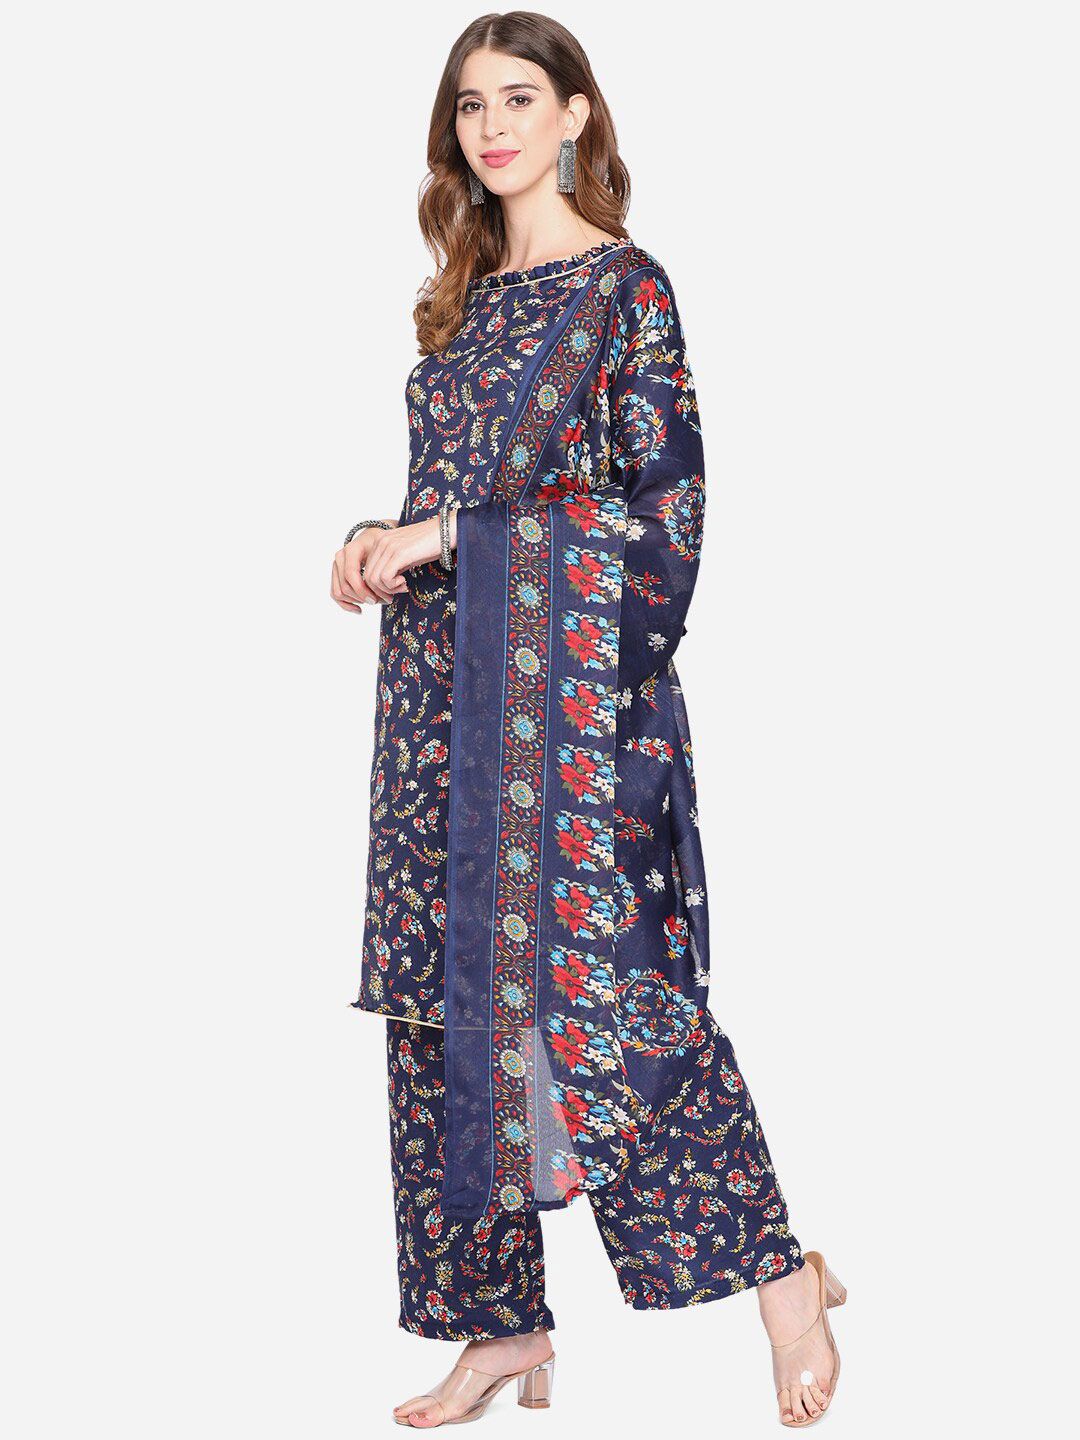 SHAVYA Navy Blue & White Printed Unstitched Dress Material Price in India